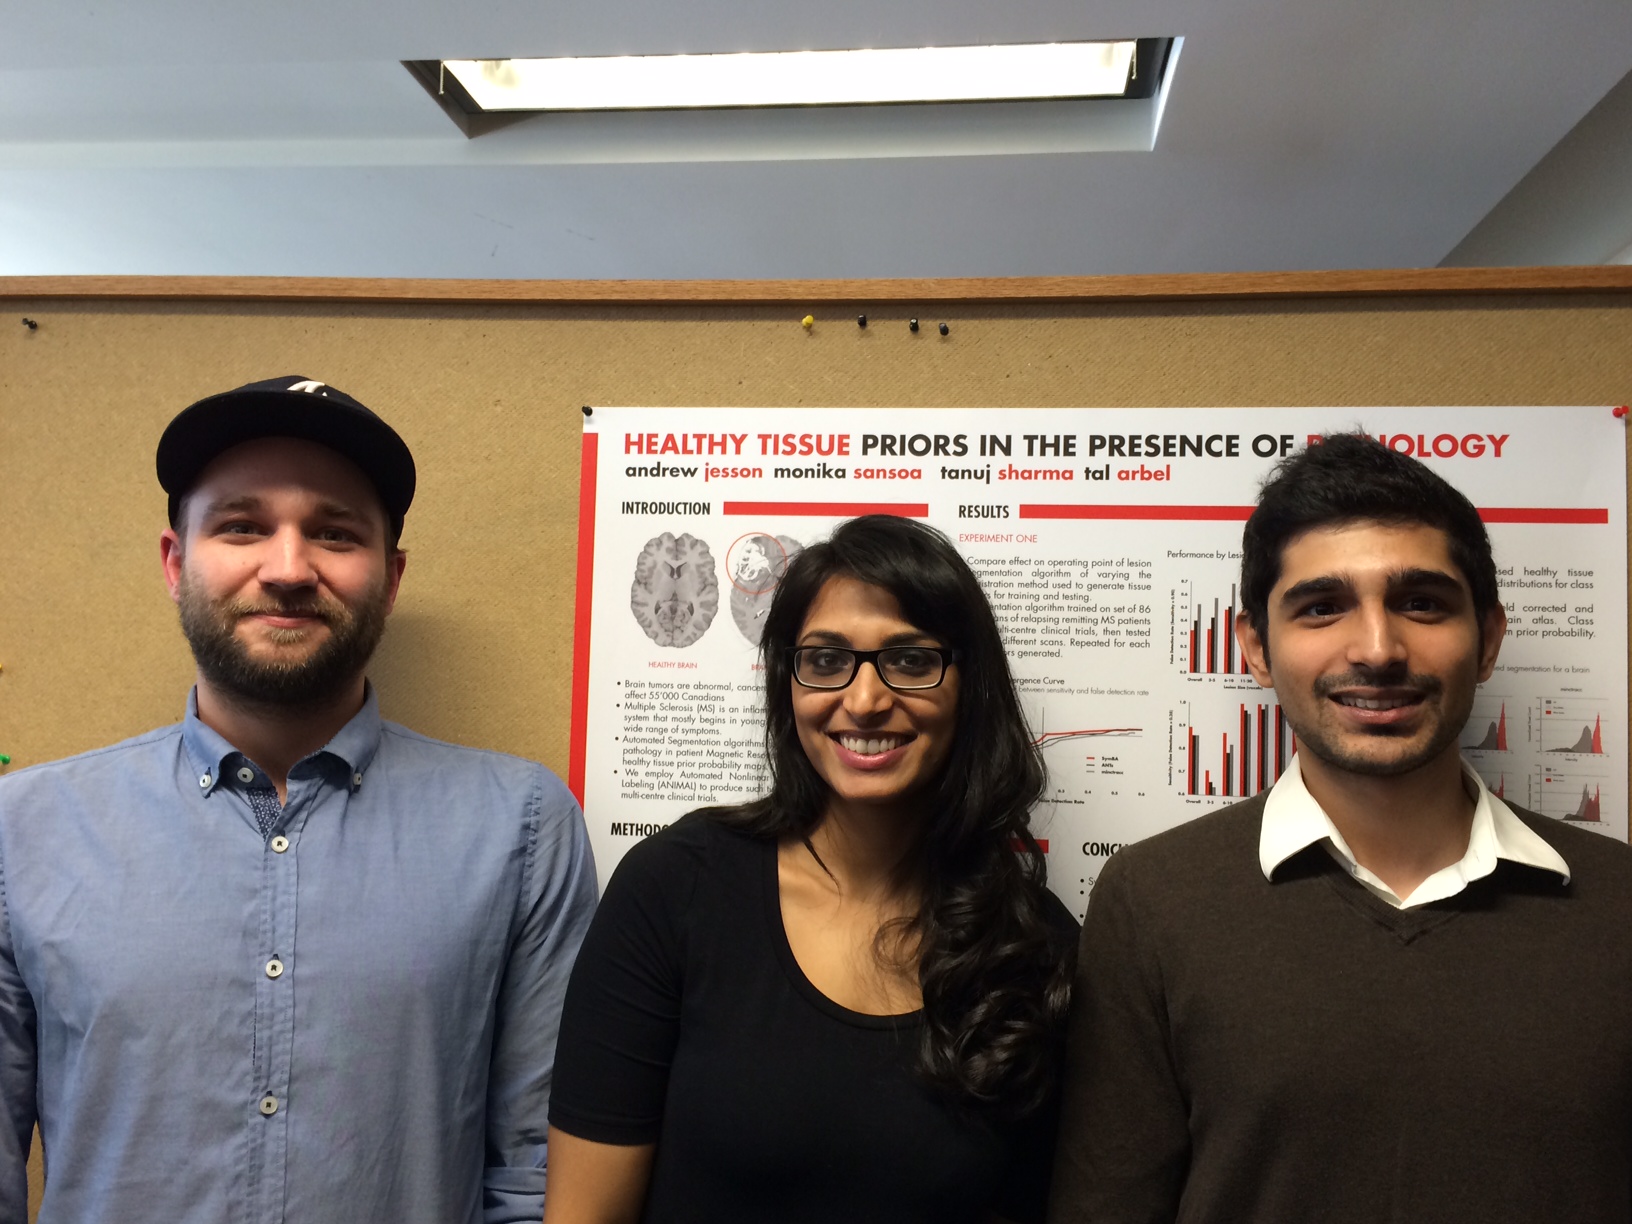 Andrew Jesson, Monika Sansoa, Tanuj Sharma present their poster for the undergraduate design project